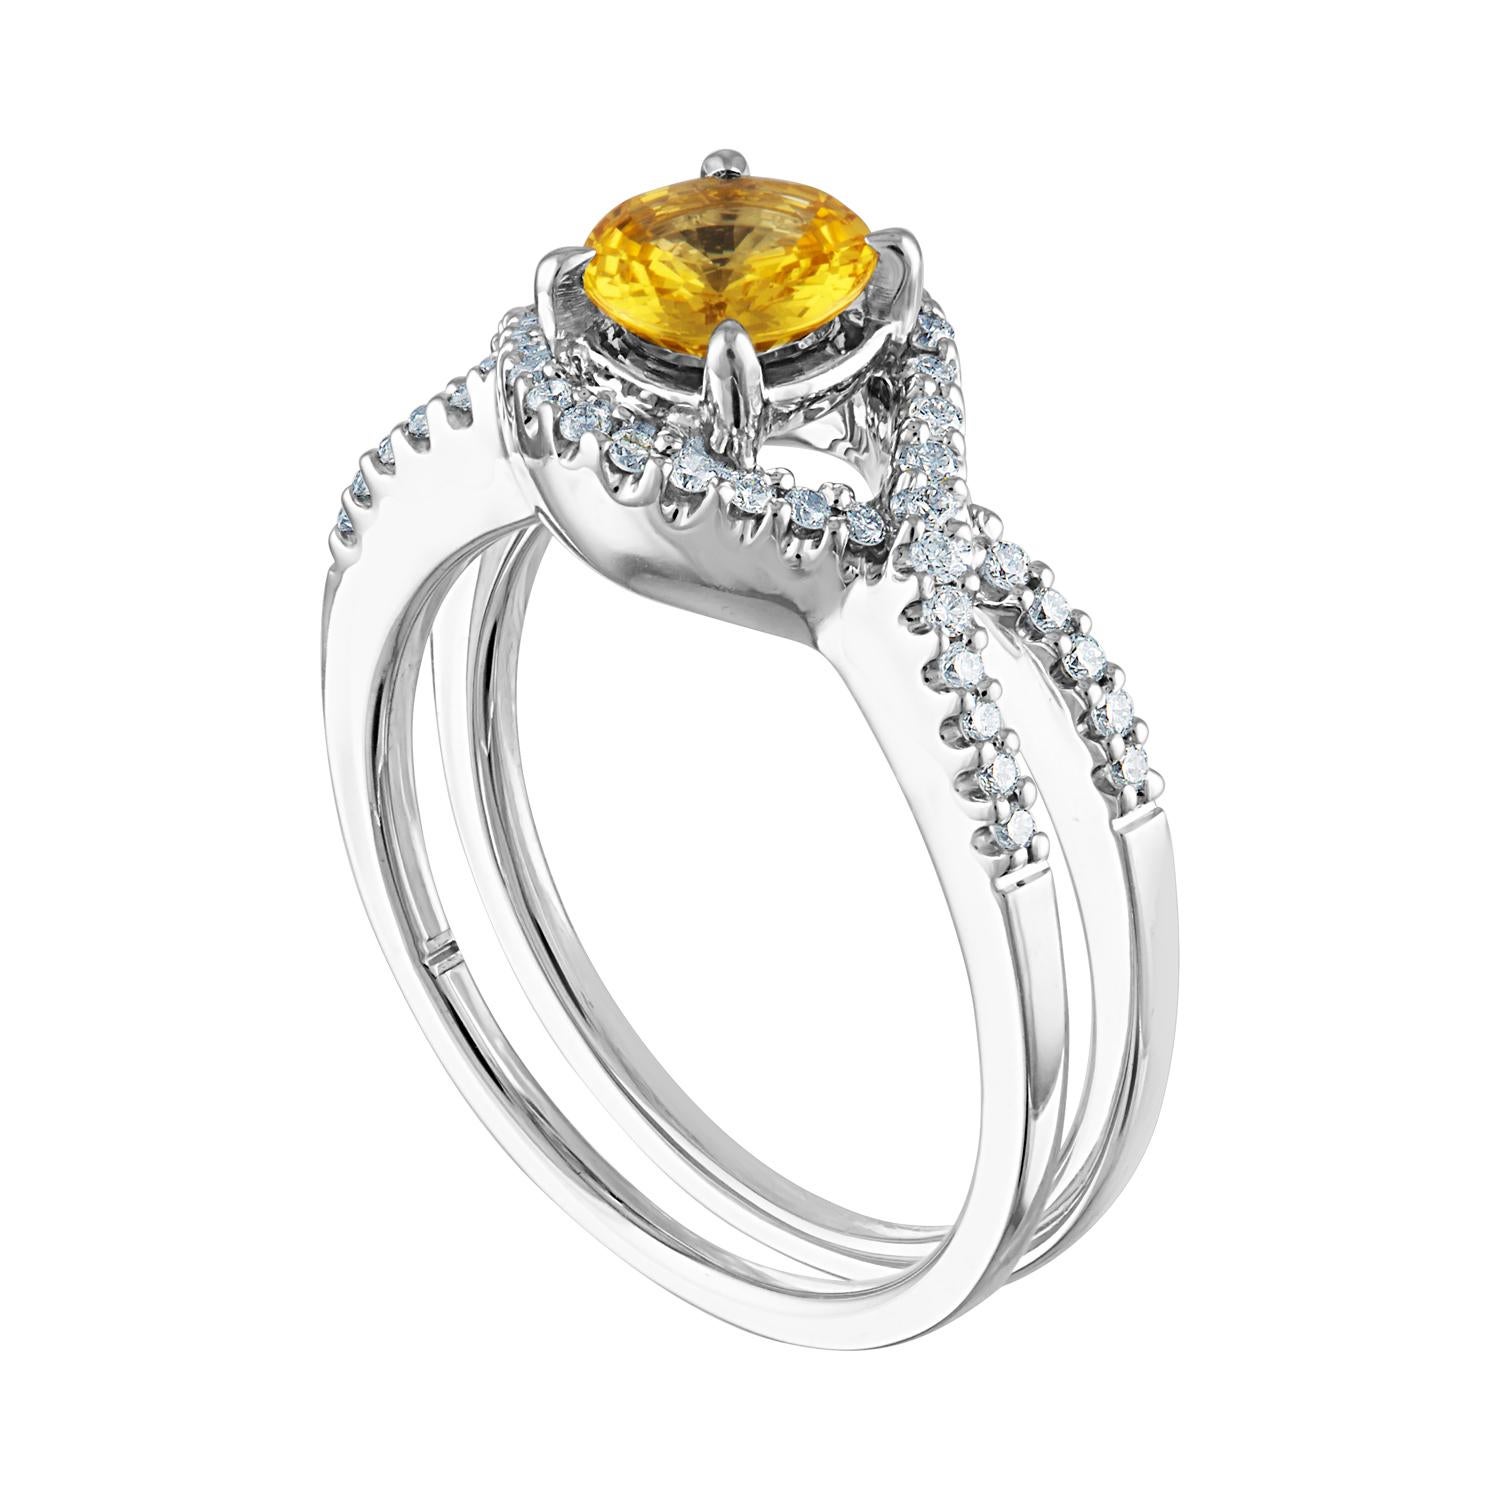 Beautiful Twist Shank Ring
The ring is 18K White Gold
The Center Stone is a Round Yellow Sapphire 0.77 Carats
The Sapphire is AGL Certified Heated
There are 0.36 Carats in Diamonds F/G VS/SI
The ring is a size 6.00, sizable.
The ring weighs 5.3 grams